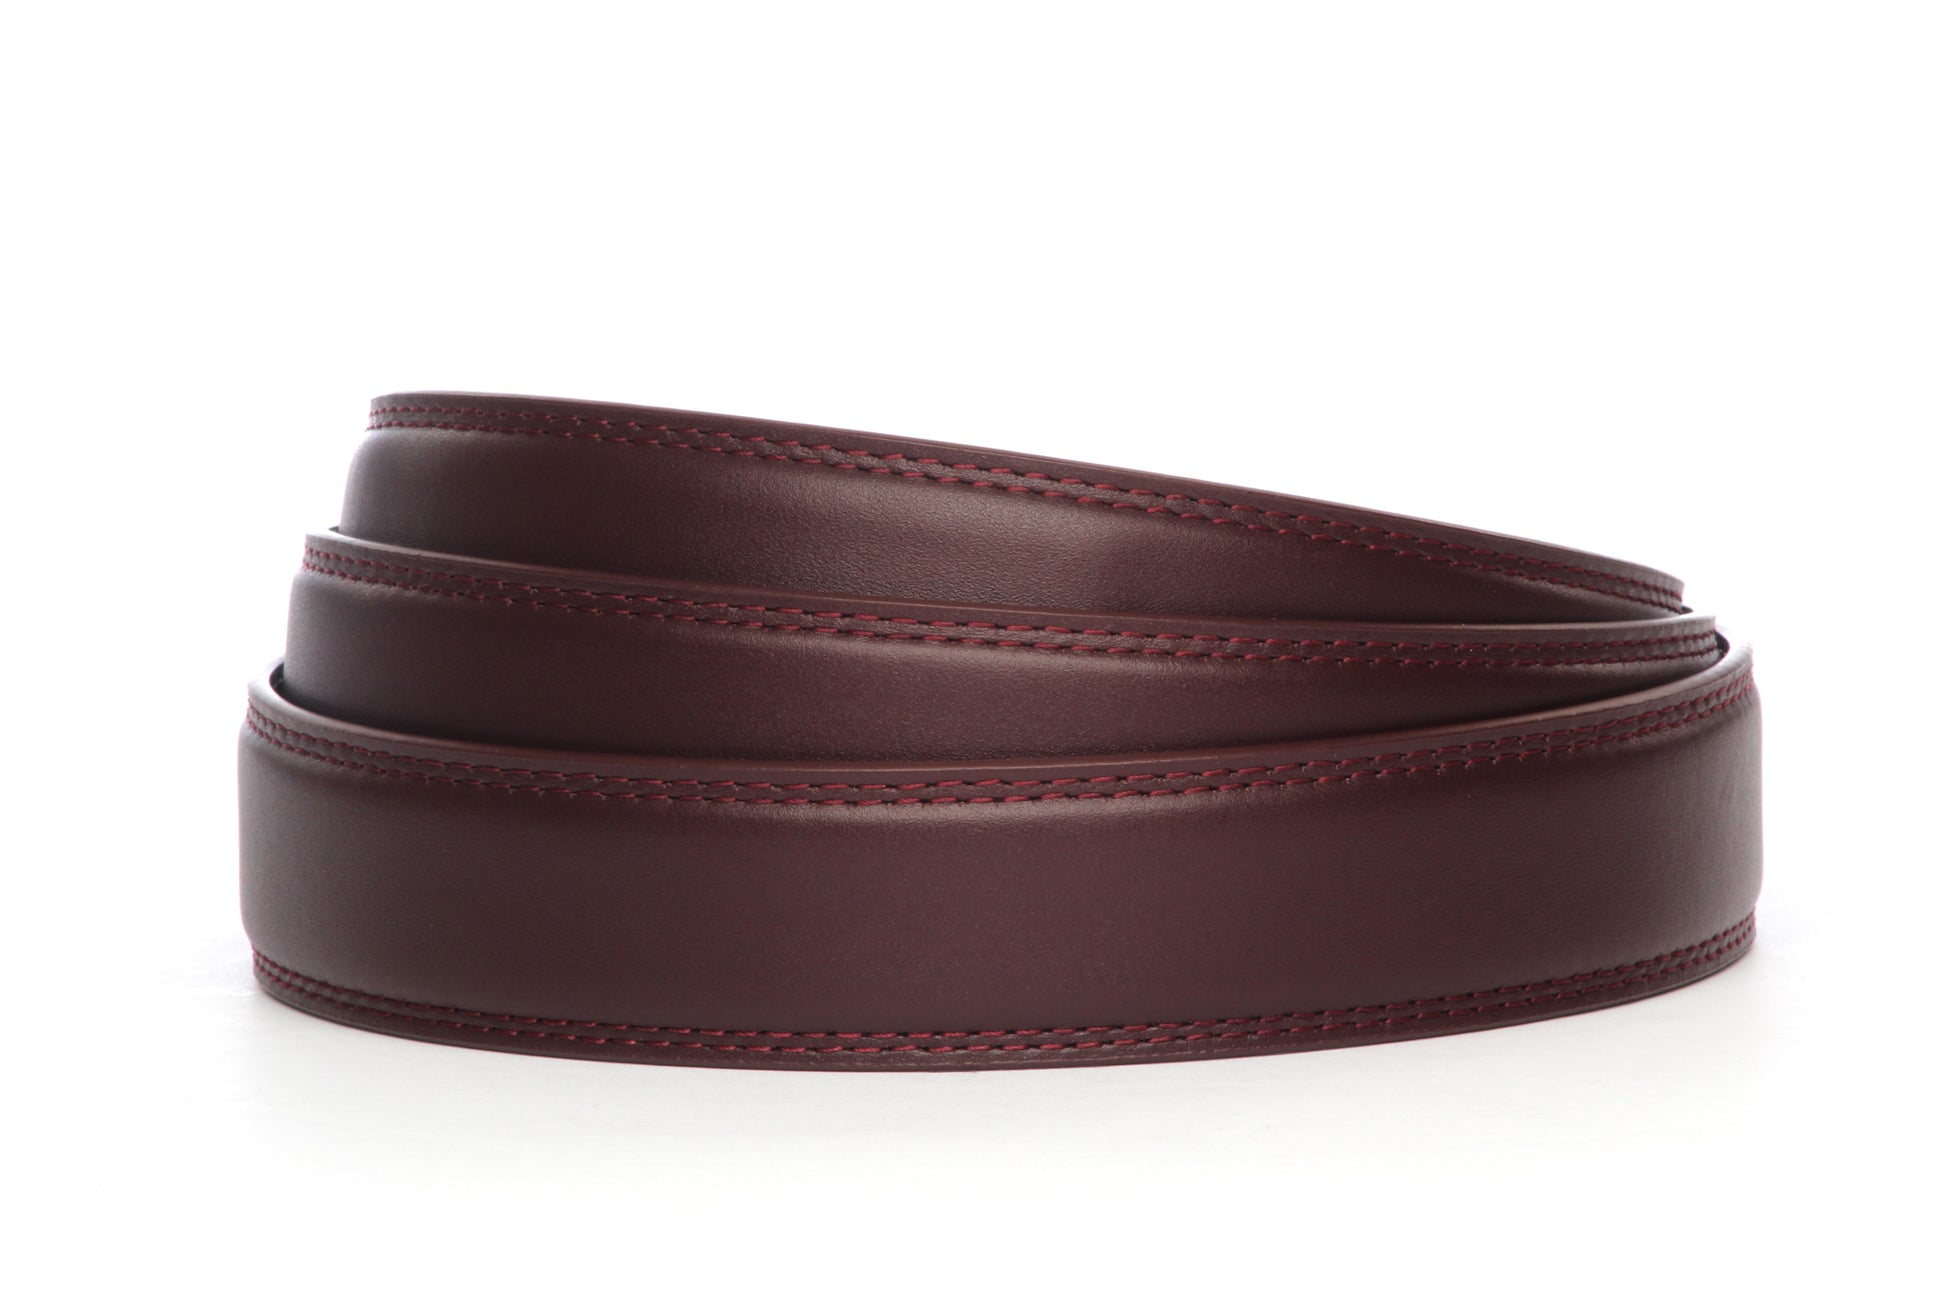 Men's leather belt strap in oxblood with a 1.25-inch width, formal look